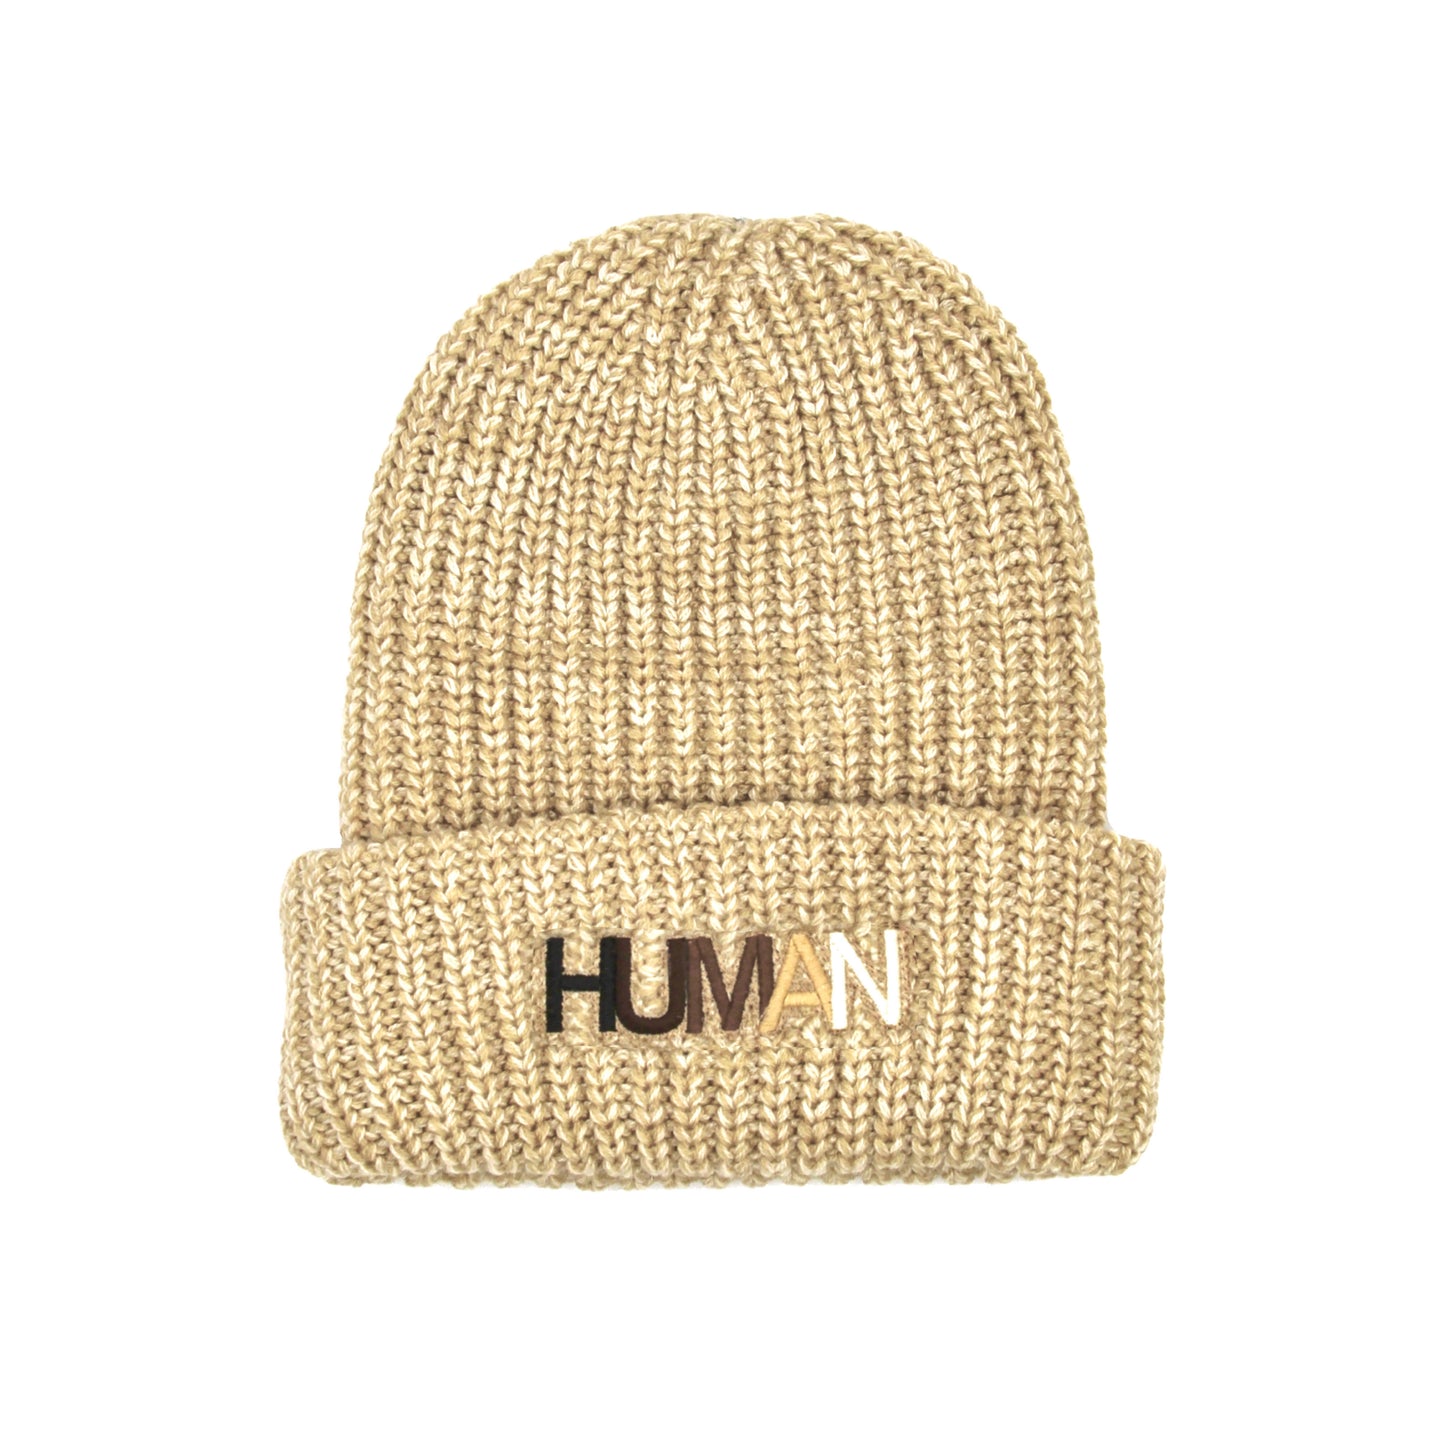 Human Embroidered Beanie